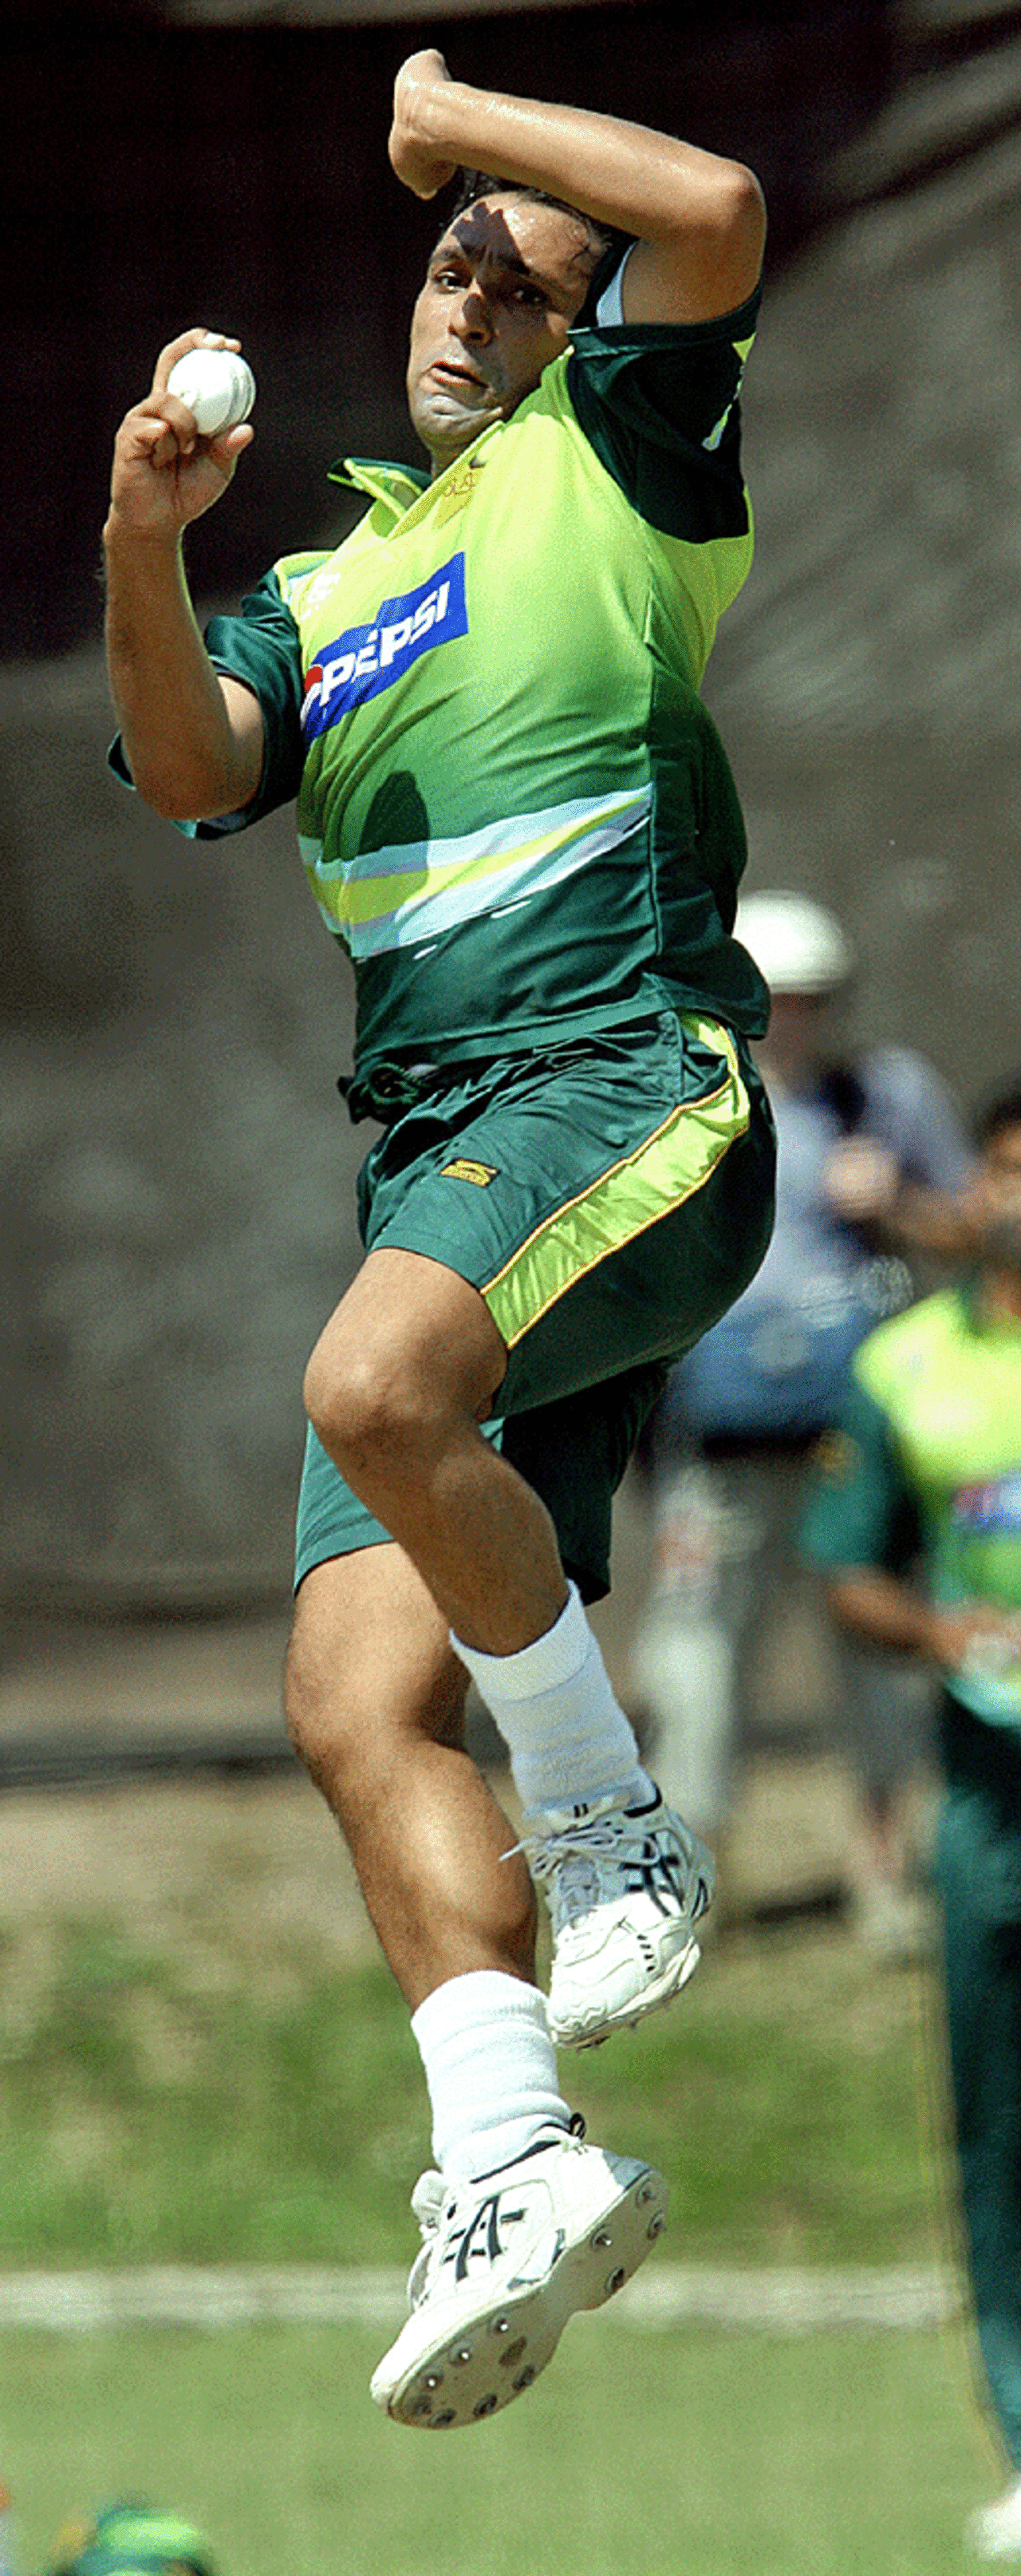 Azhar Mahmood at the top of his run-up at practice ahead of the opeing match of the World Cup between West Indies and Pakistan, March 12, 2007